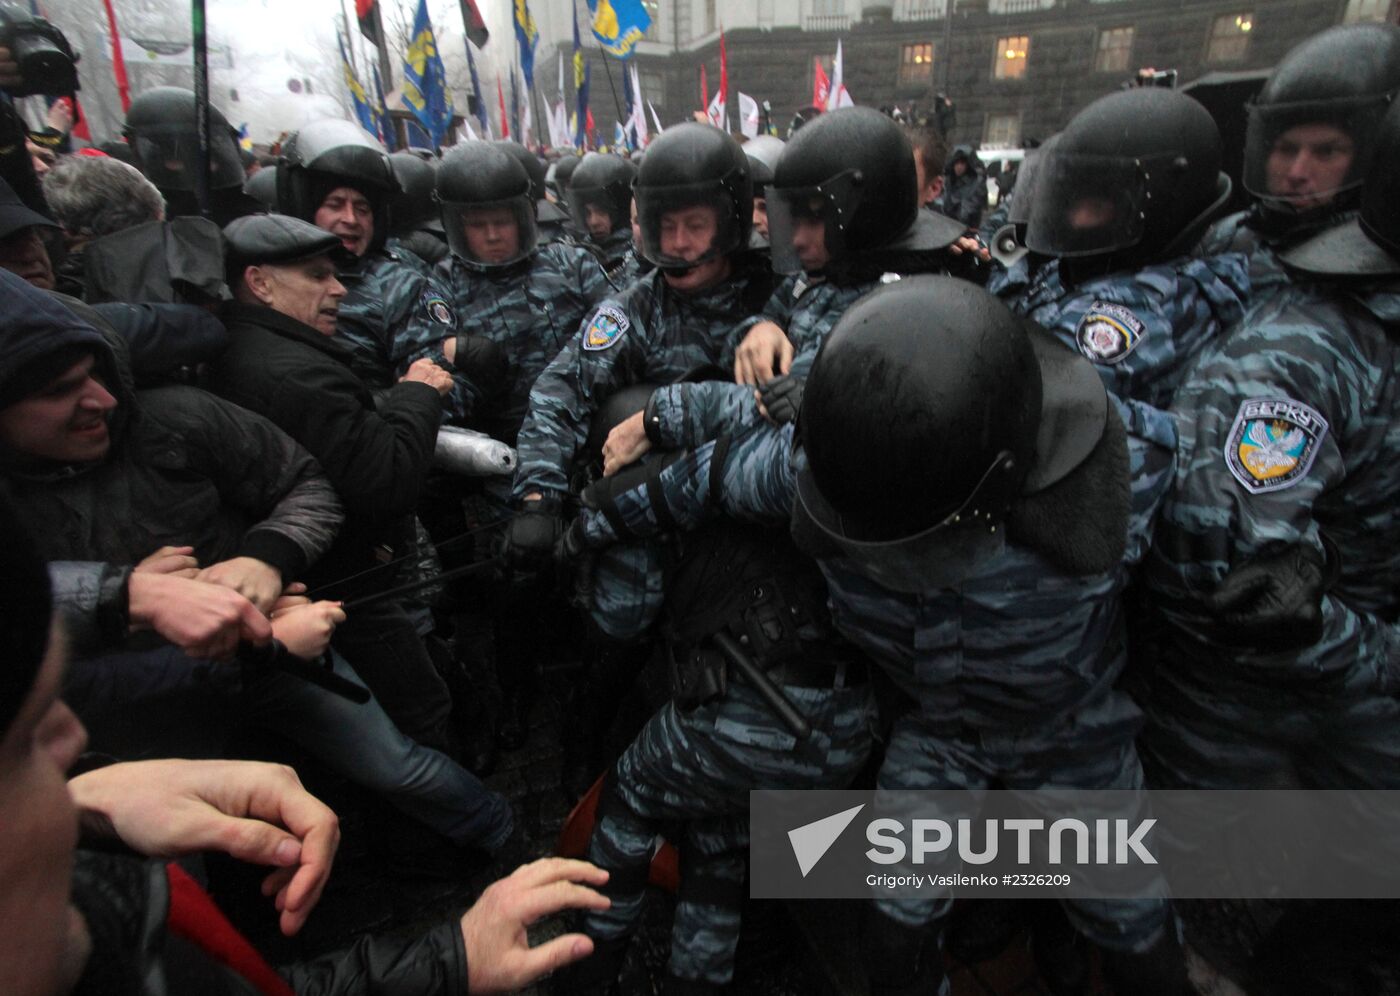 EU integration supporters clash with police in Kiev